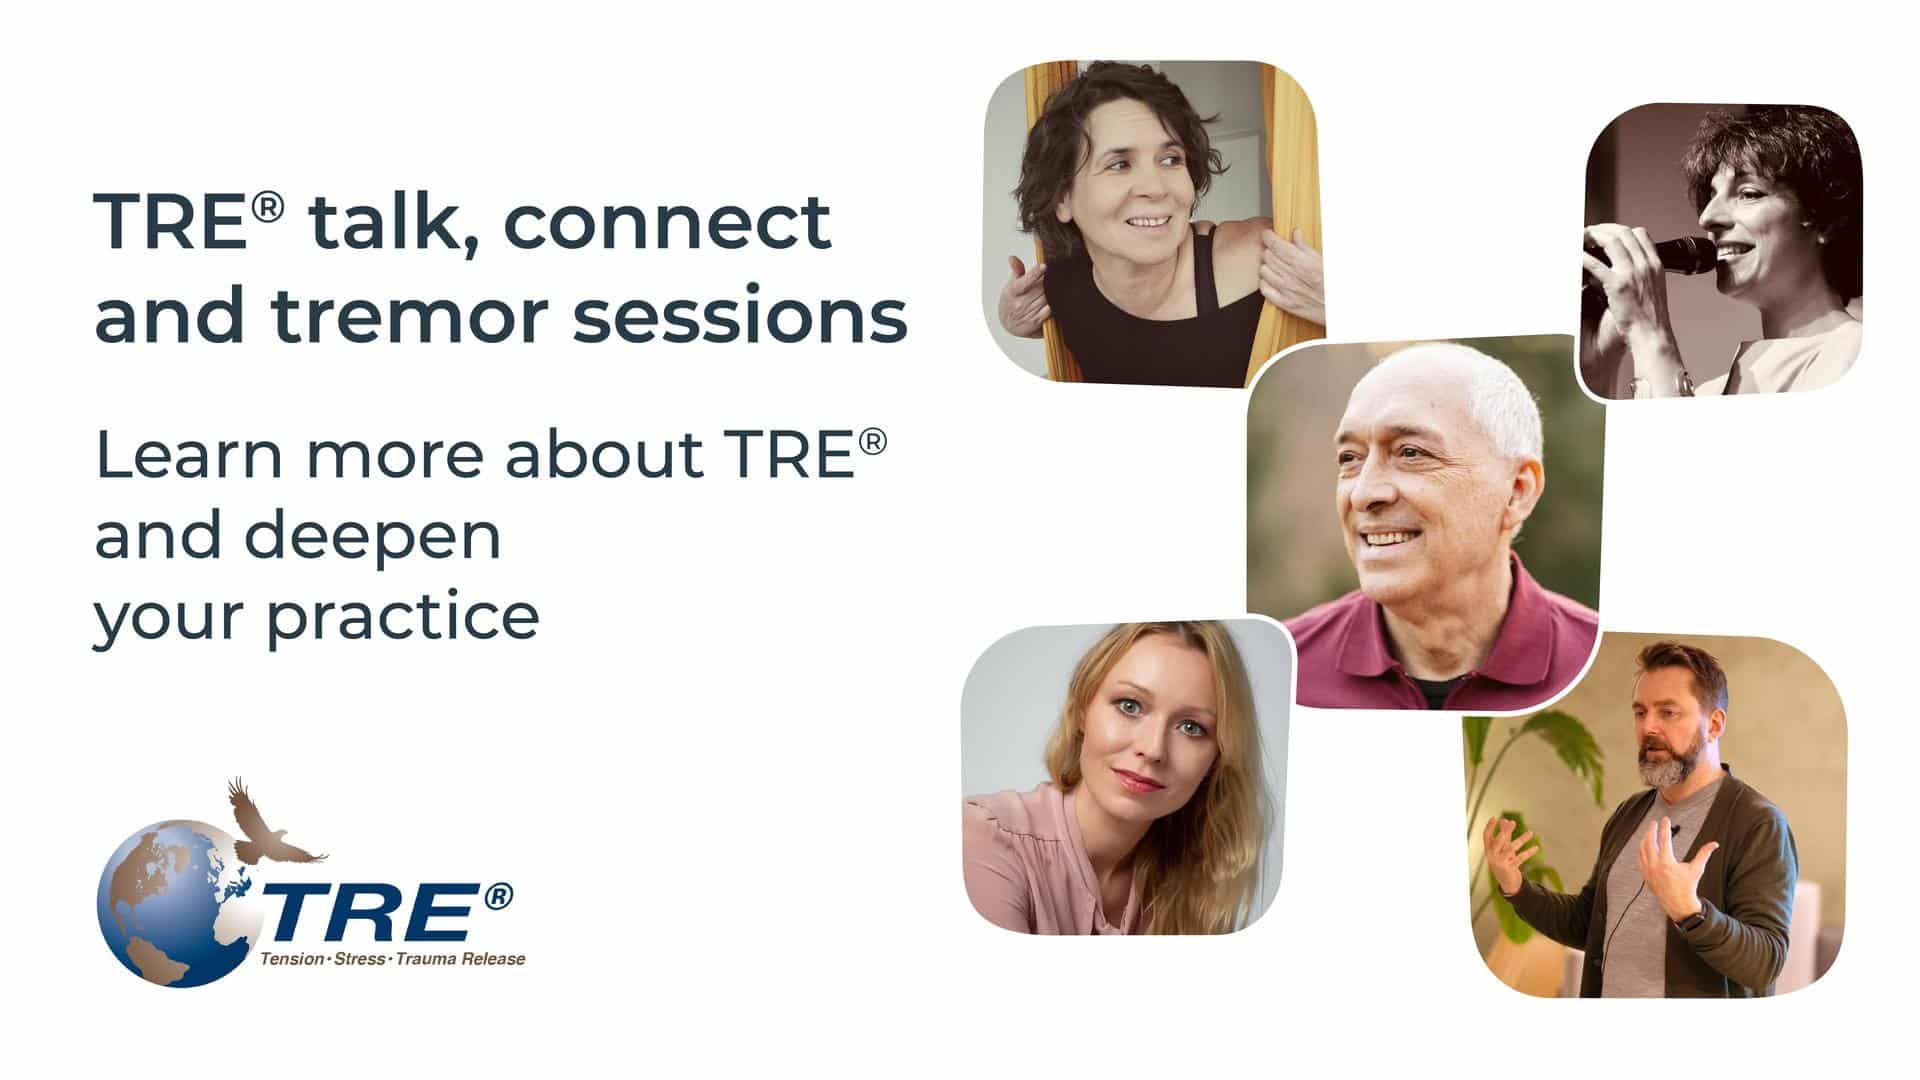 TRE® talk and tremor sessions